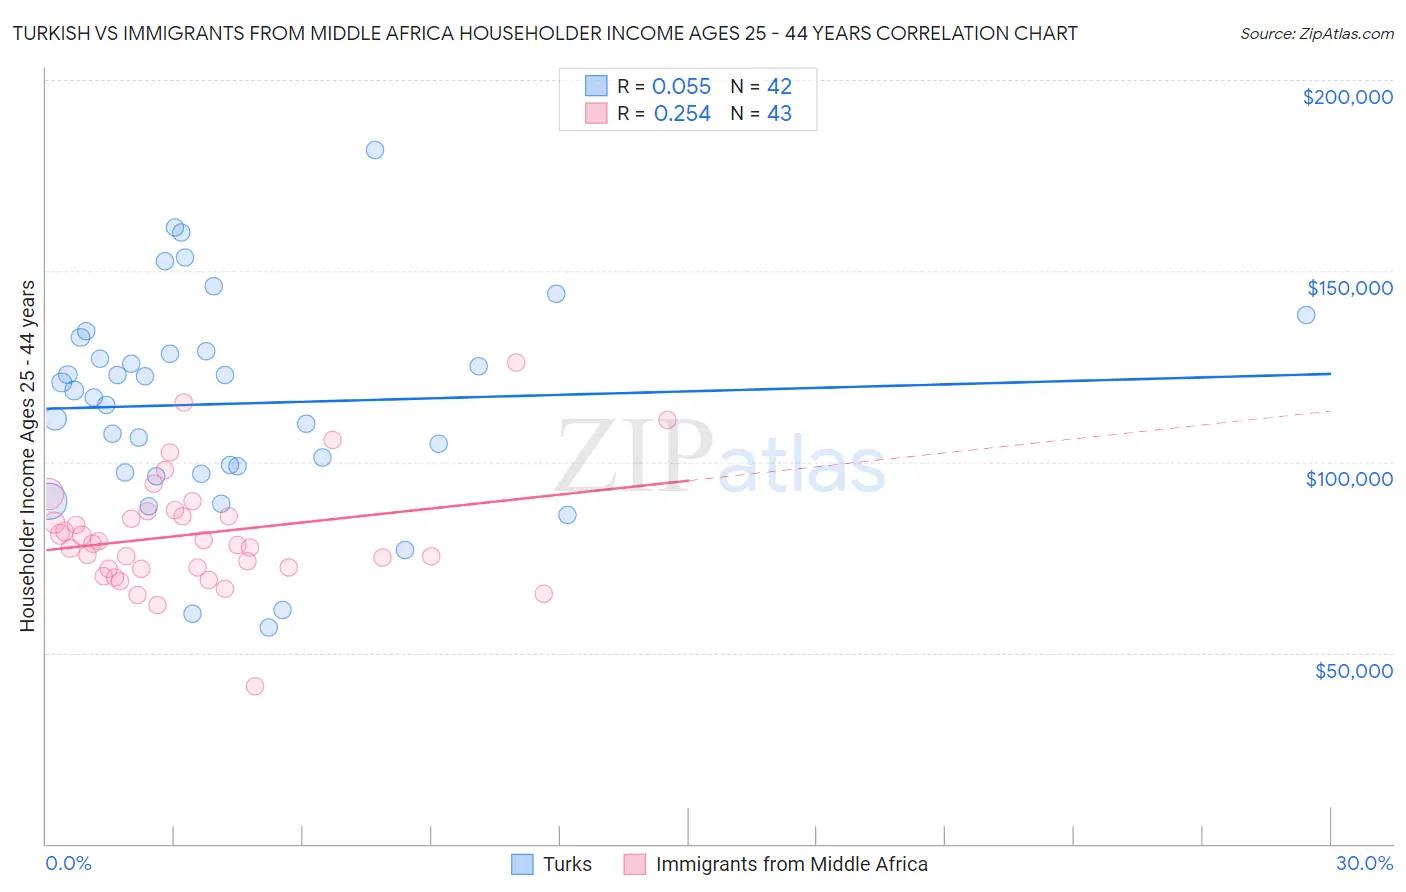 Turkish vs Immigrants from Middle Africa Householder Income Ages 25 - 44 years